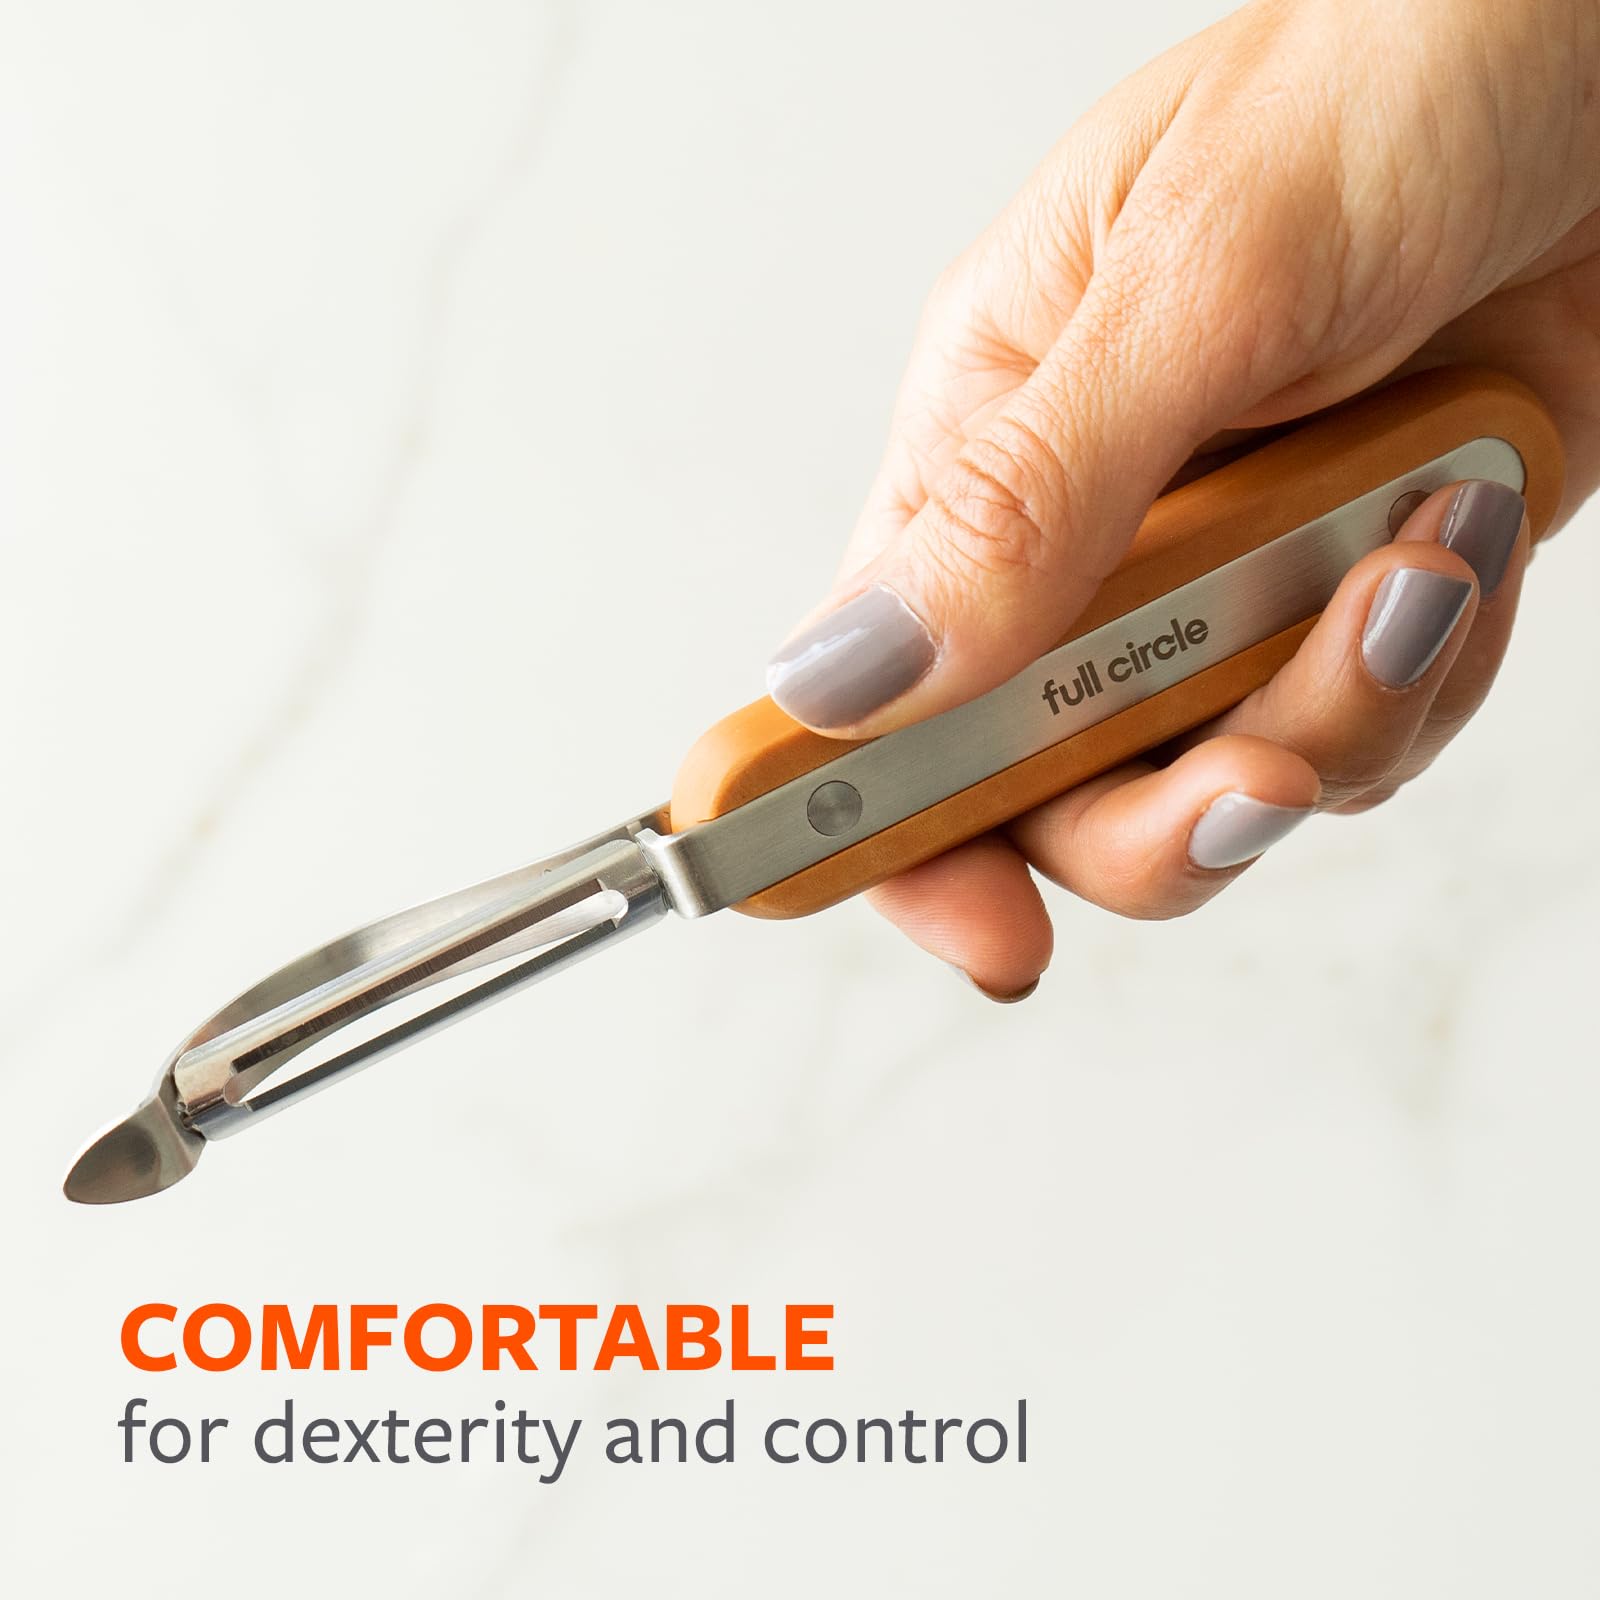 Full Circle Peel Out, Smooth Glide Straight Fruit and Vegetable Peeler: Stainless Steel, Sharp, Precise, and Eco-Friendly. Dishwasher Safe.